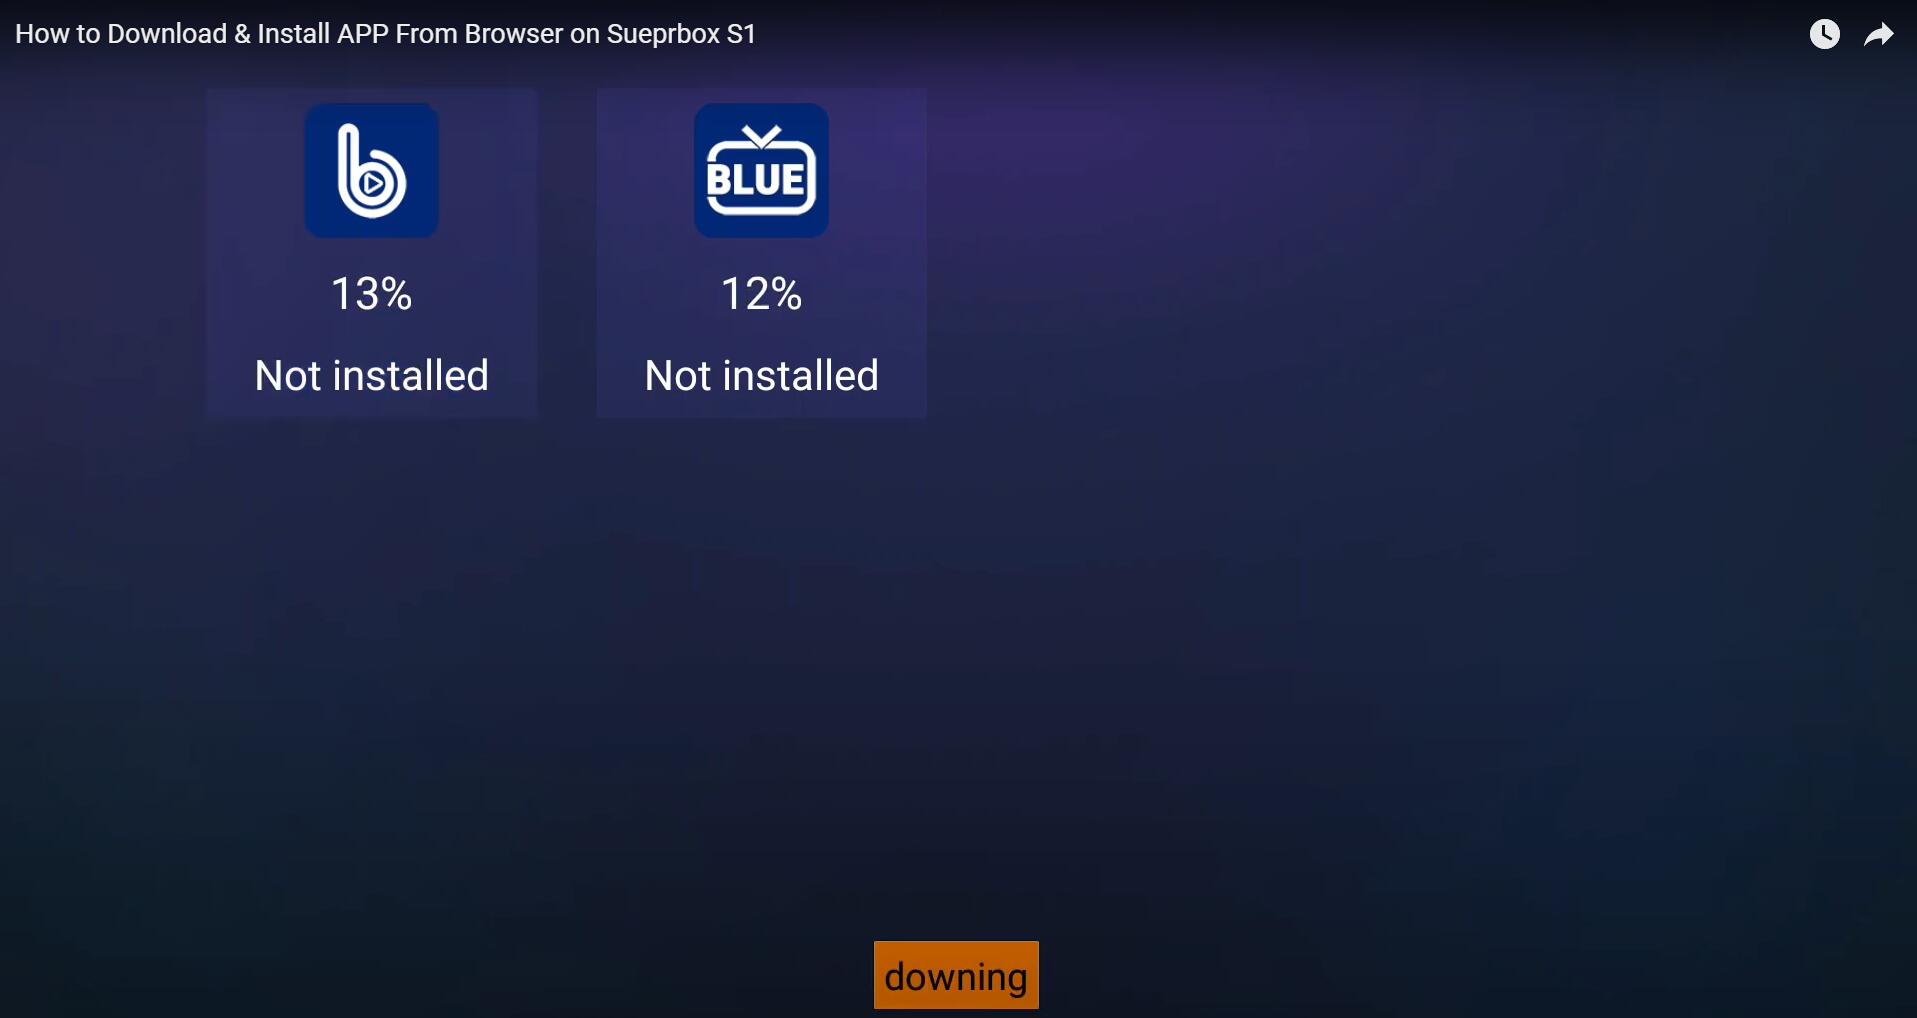 How to Download & Install APP From Browser on Sueprbox S1?